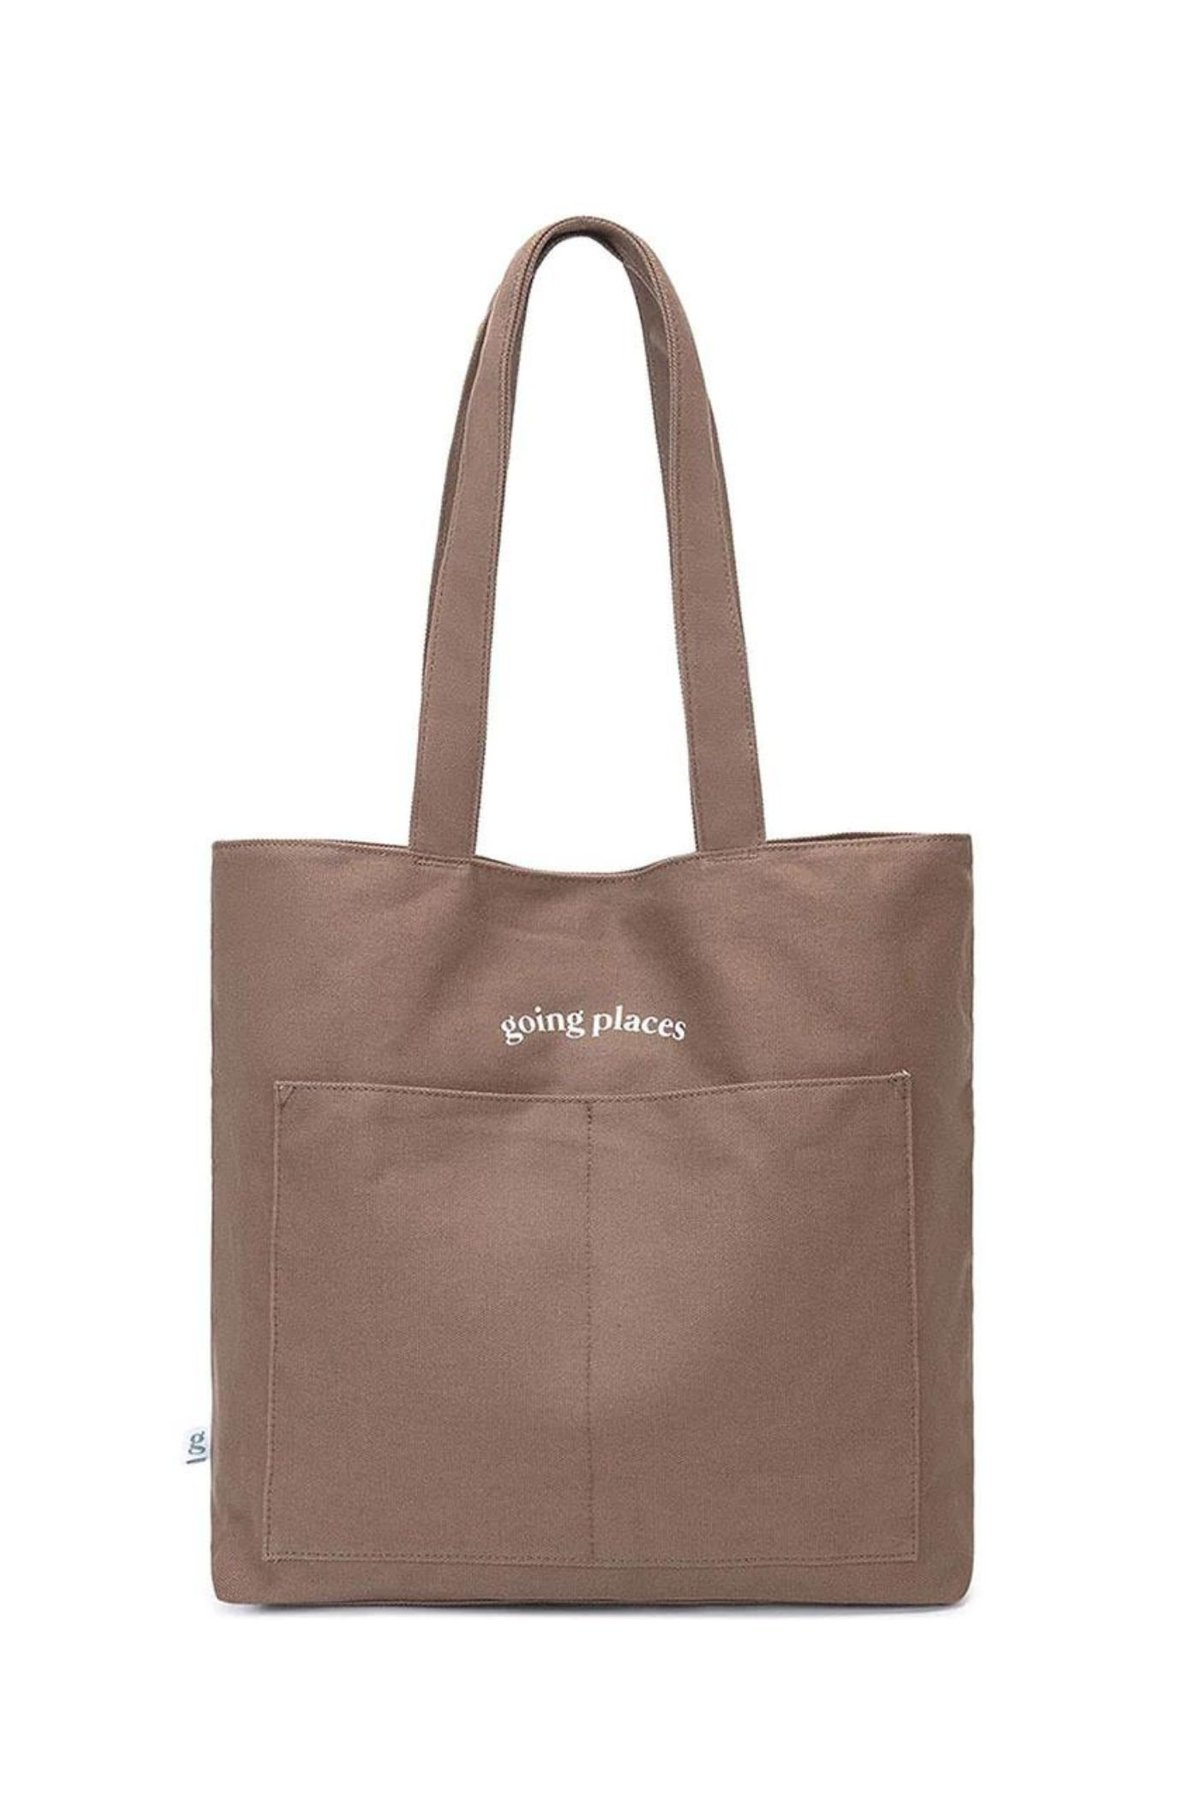 Good Totes (Going Places Tote - Espresso)